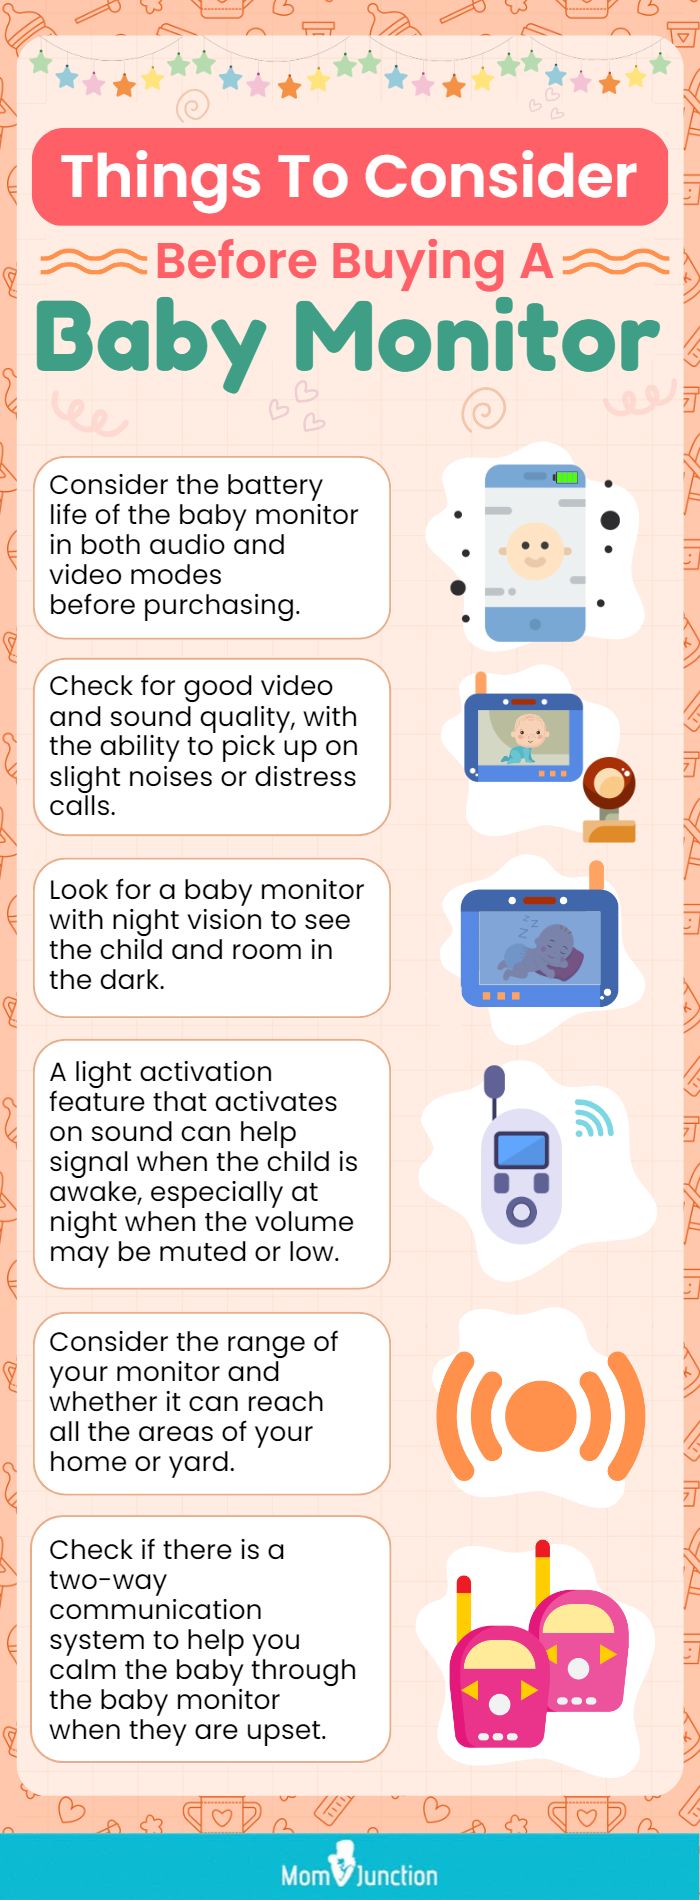 Things To Consider Before Buying A Baby Monitor (infographic)